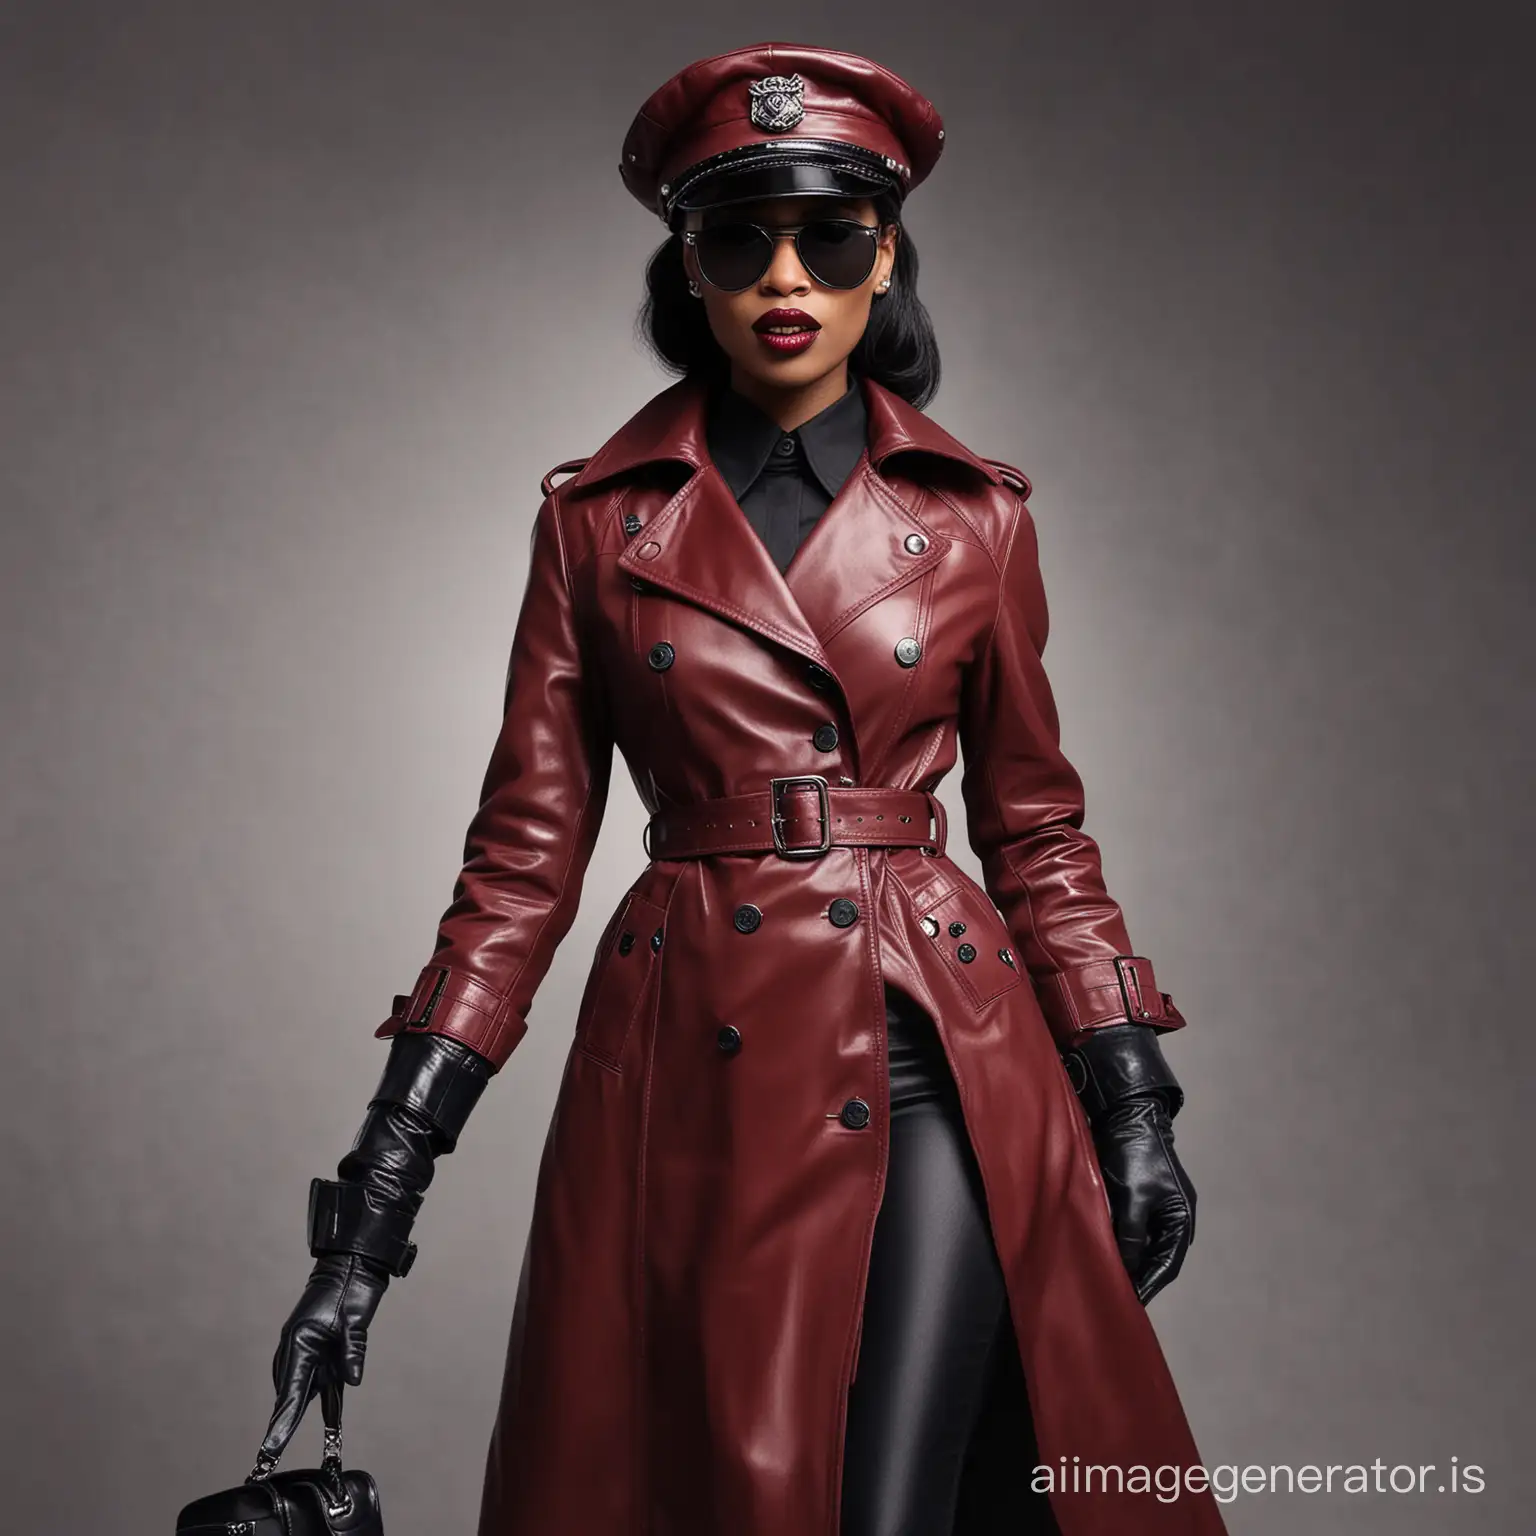 ebony woman in dark red leather trench coat, leather gloves, sunglasses, black lipstick, black leather masters cap, leather studded dog collar